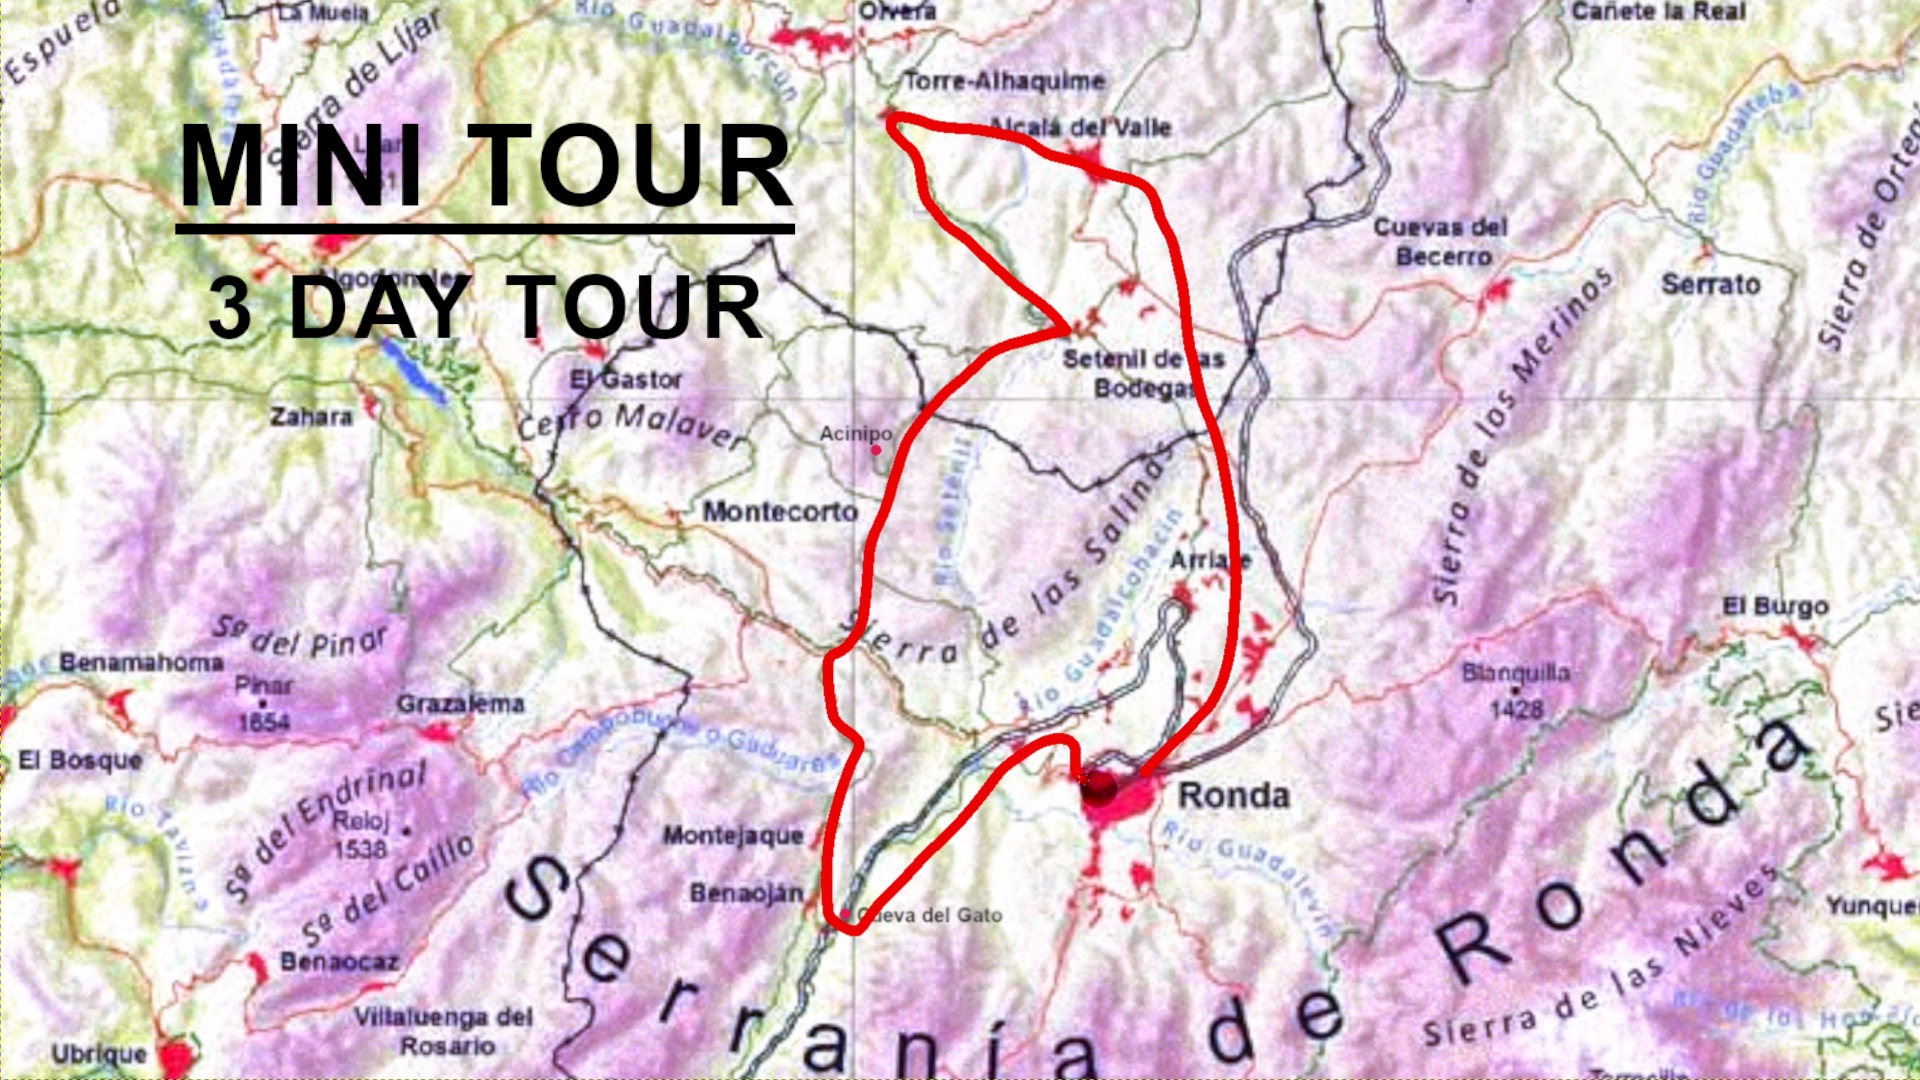 Route map for 3 day bike tour in andalucia spain